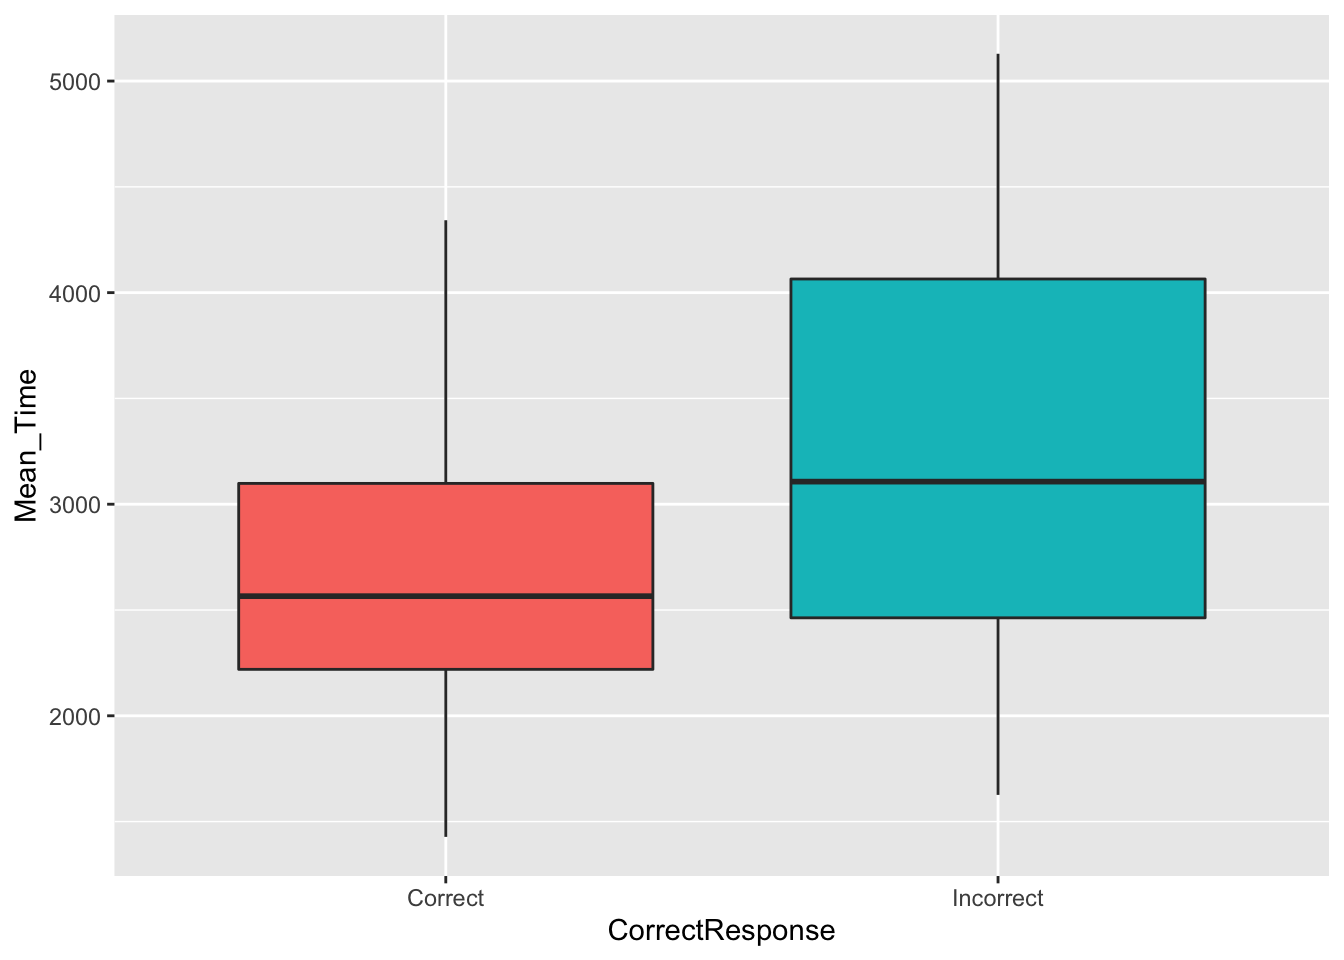 A boxplot of the spreads of Mean Time for Correct and Incorrect Responses